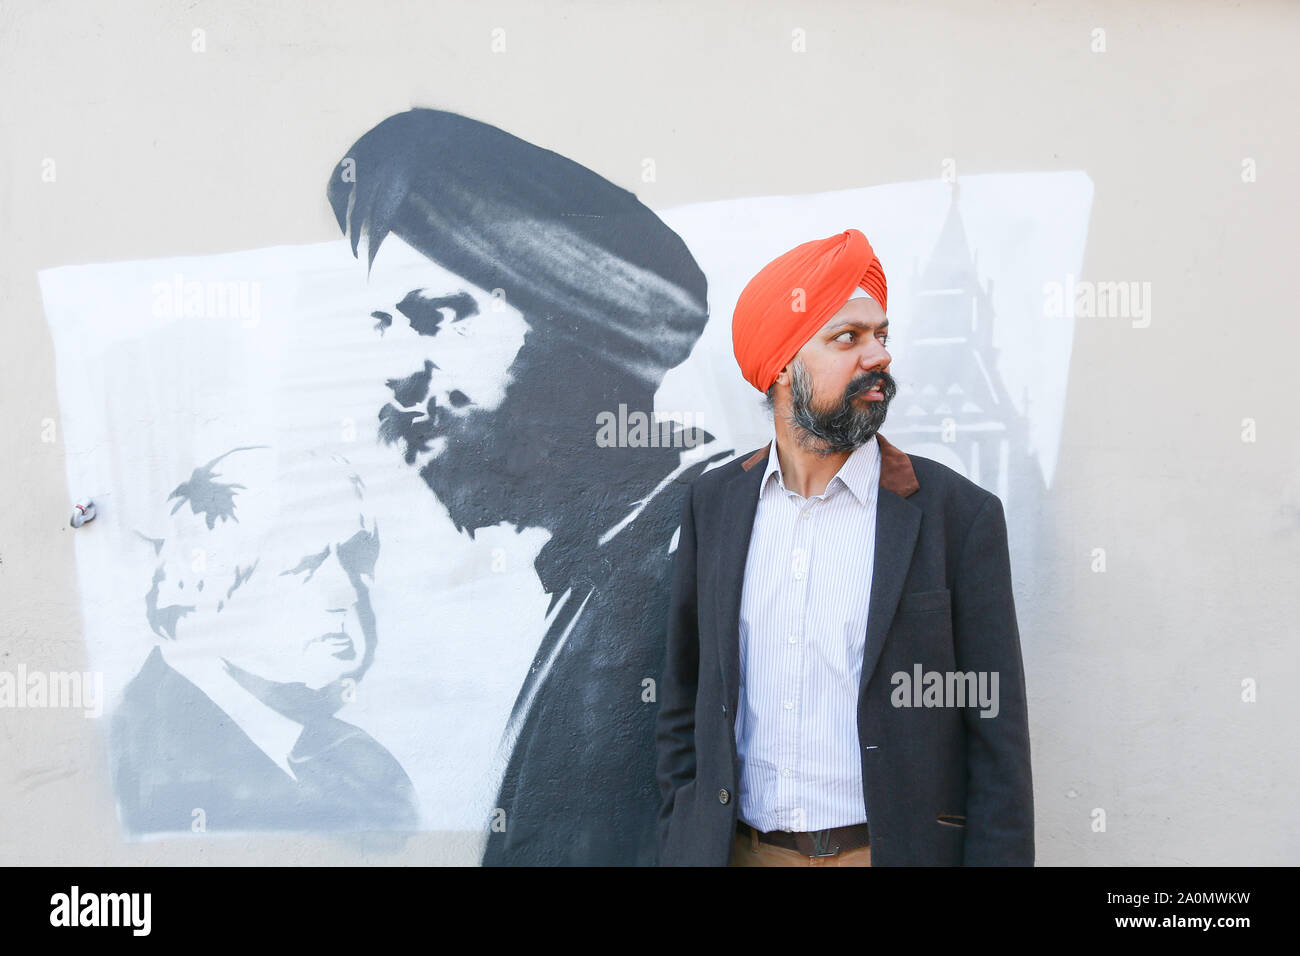 Tanmanjeet Singh Dhesi appears in a street graffiti mural, Soho Road, Handsworth, Birmingham, UK. The mural depicts the altercation Tan Dhesi had with PM Boris Johnson Sept 2019 in the House of Commons Stock Photo